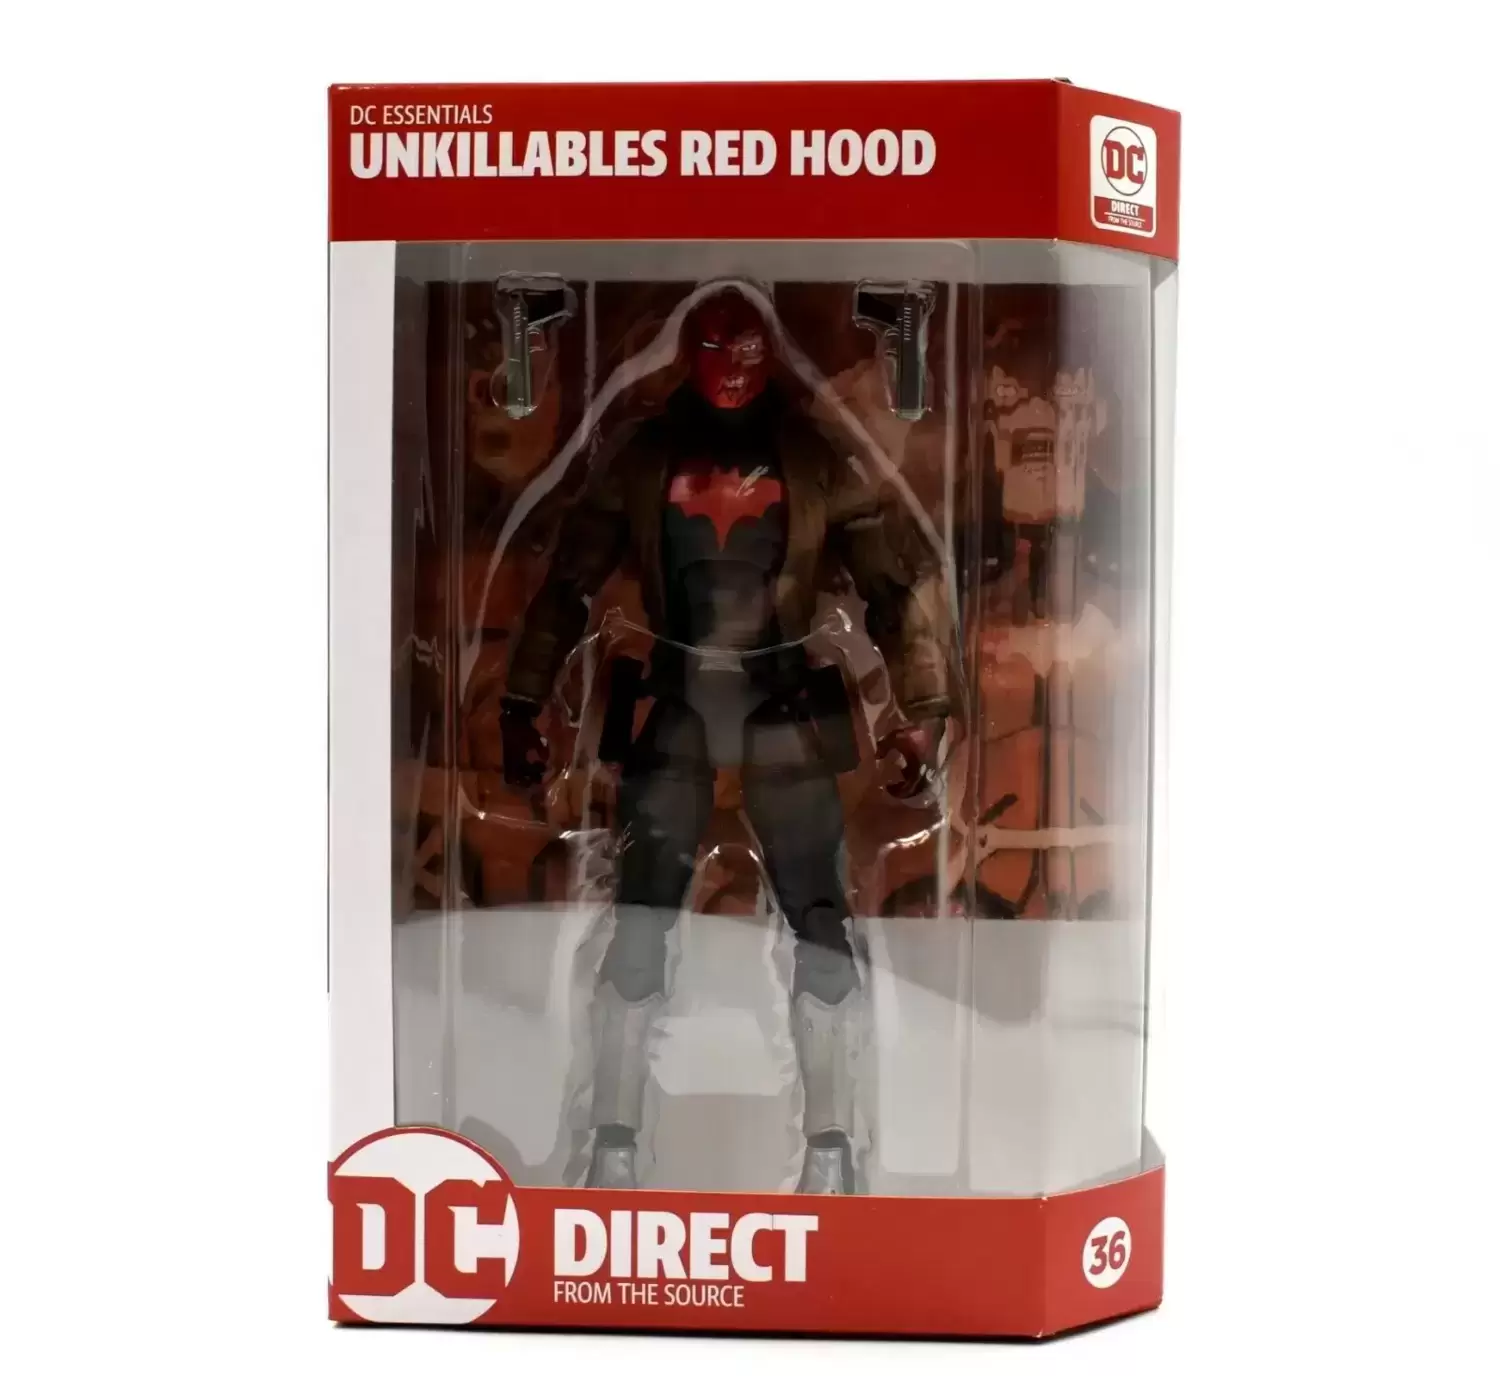 DC Essentials - DC Collectibles - Unkillables Red Hood - DC Direct